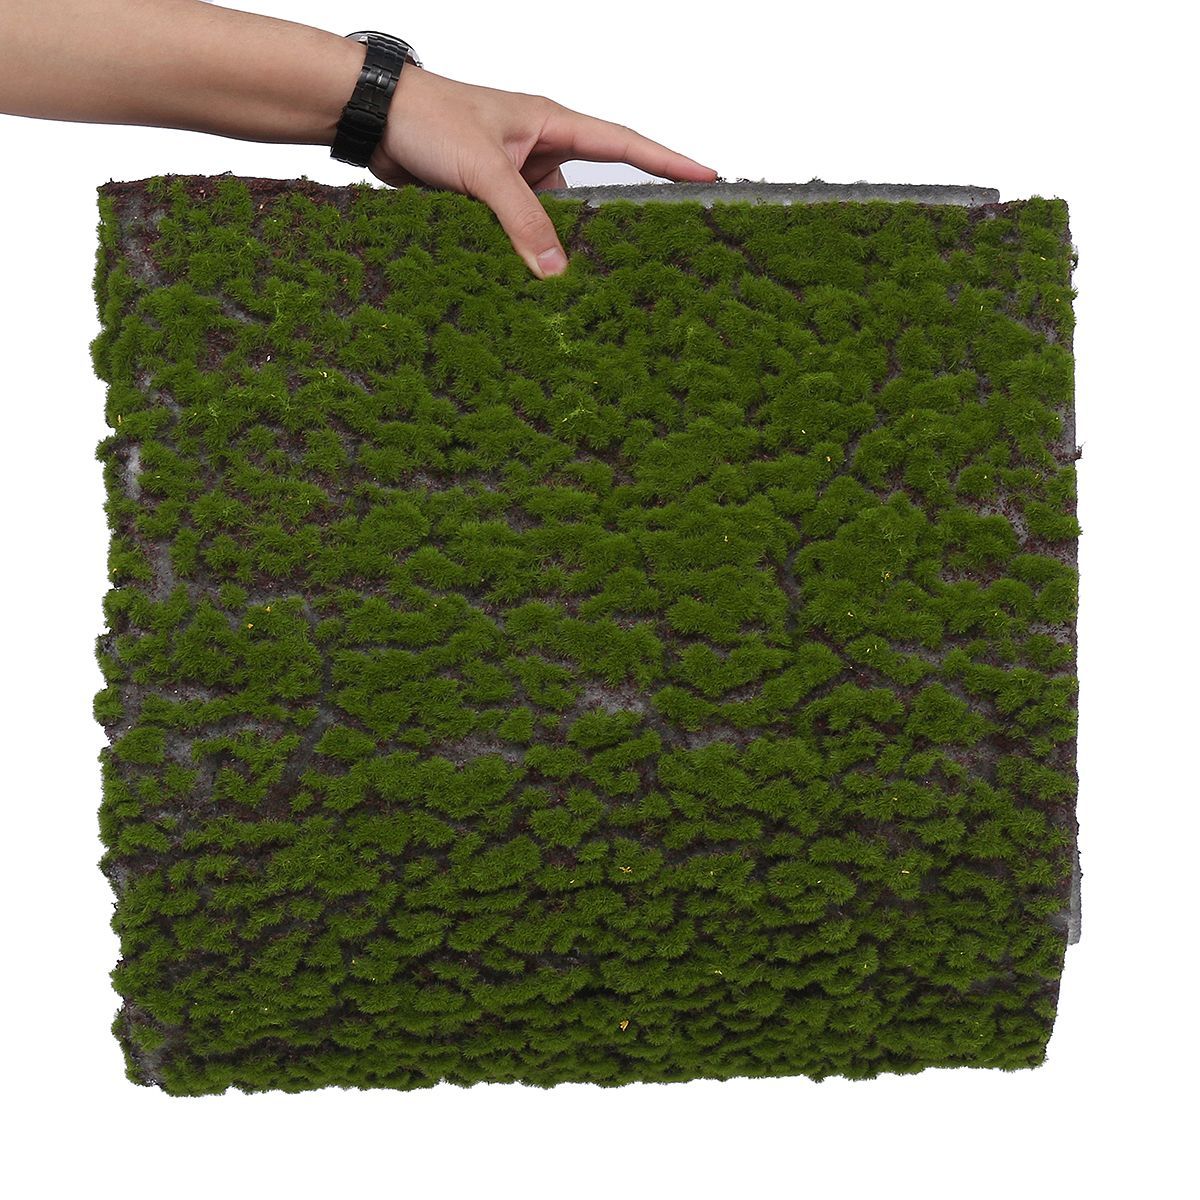 Synthetic-Grass-Faux-Artificial-Moss-Linchen-Turf-Plant-Lawn-Patio-Home-Garden-Decorations-1474949